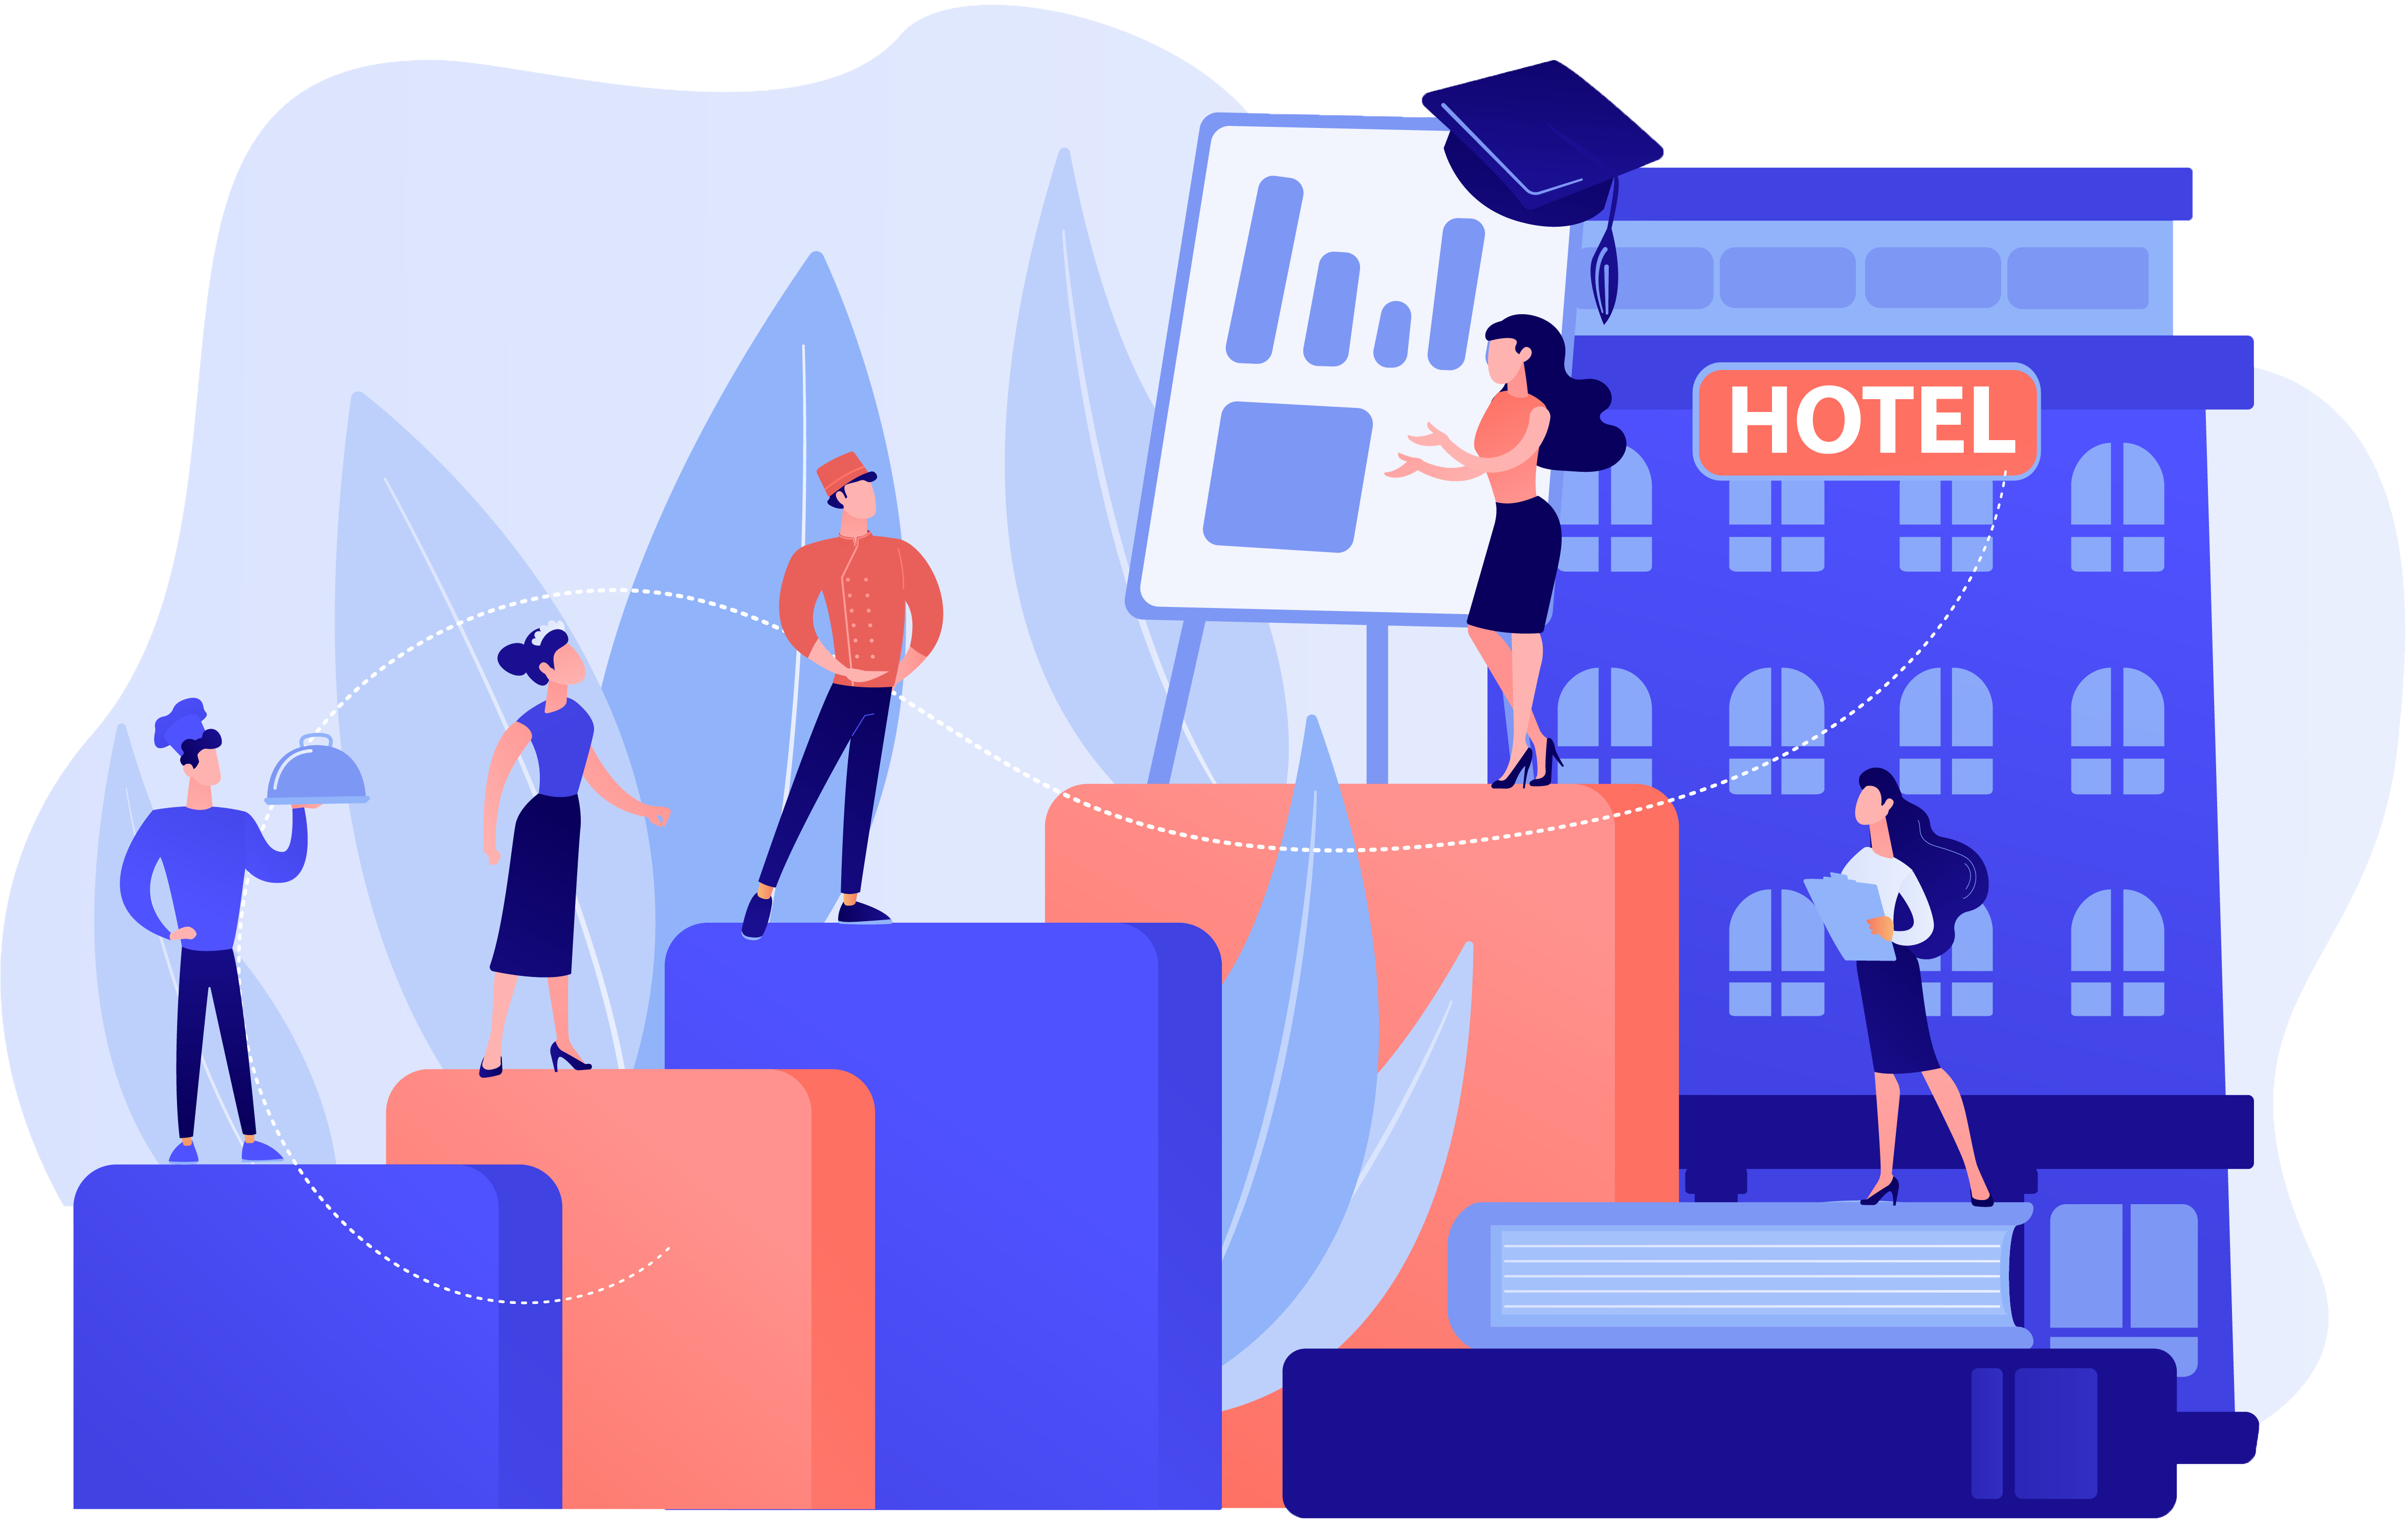 Digital transformation in the hotel industry